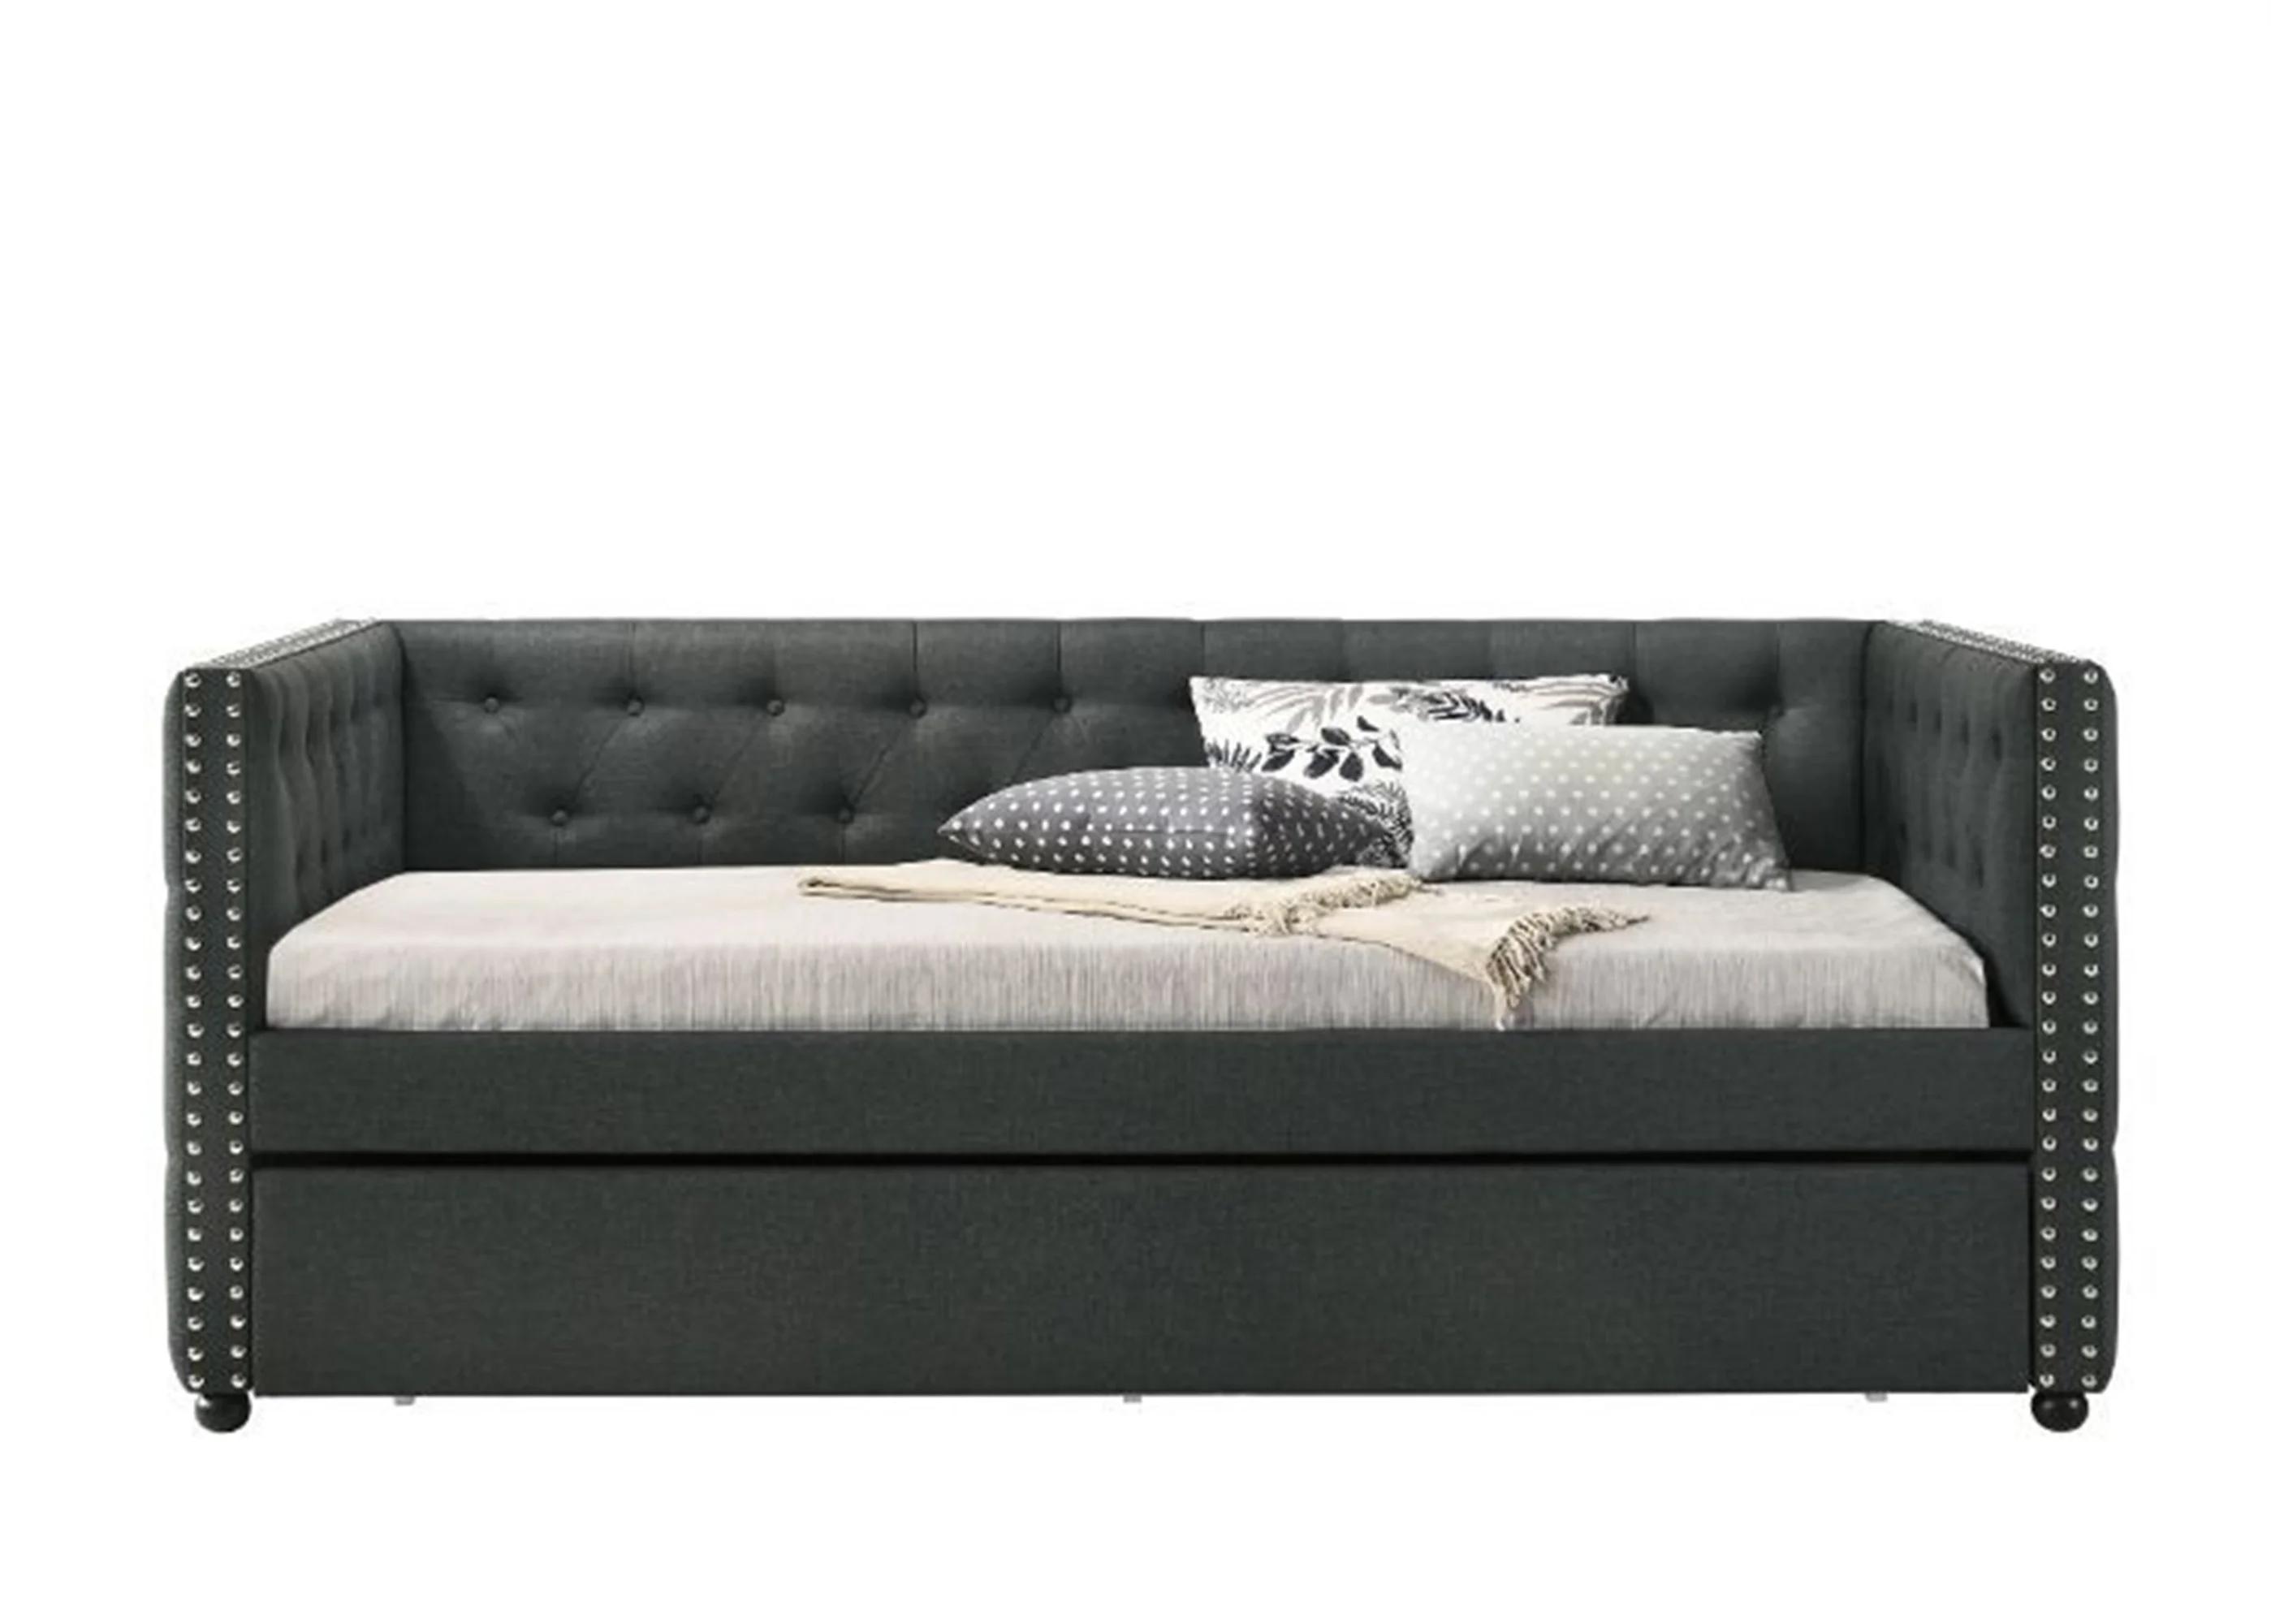 Acme Furniture Romona Daybed w/ trundle